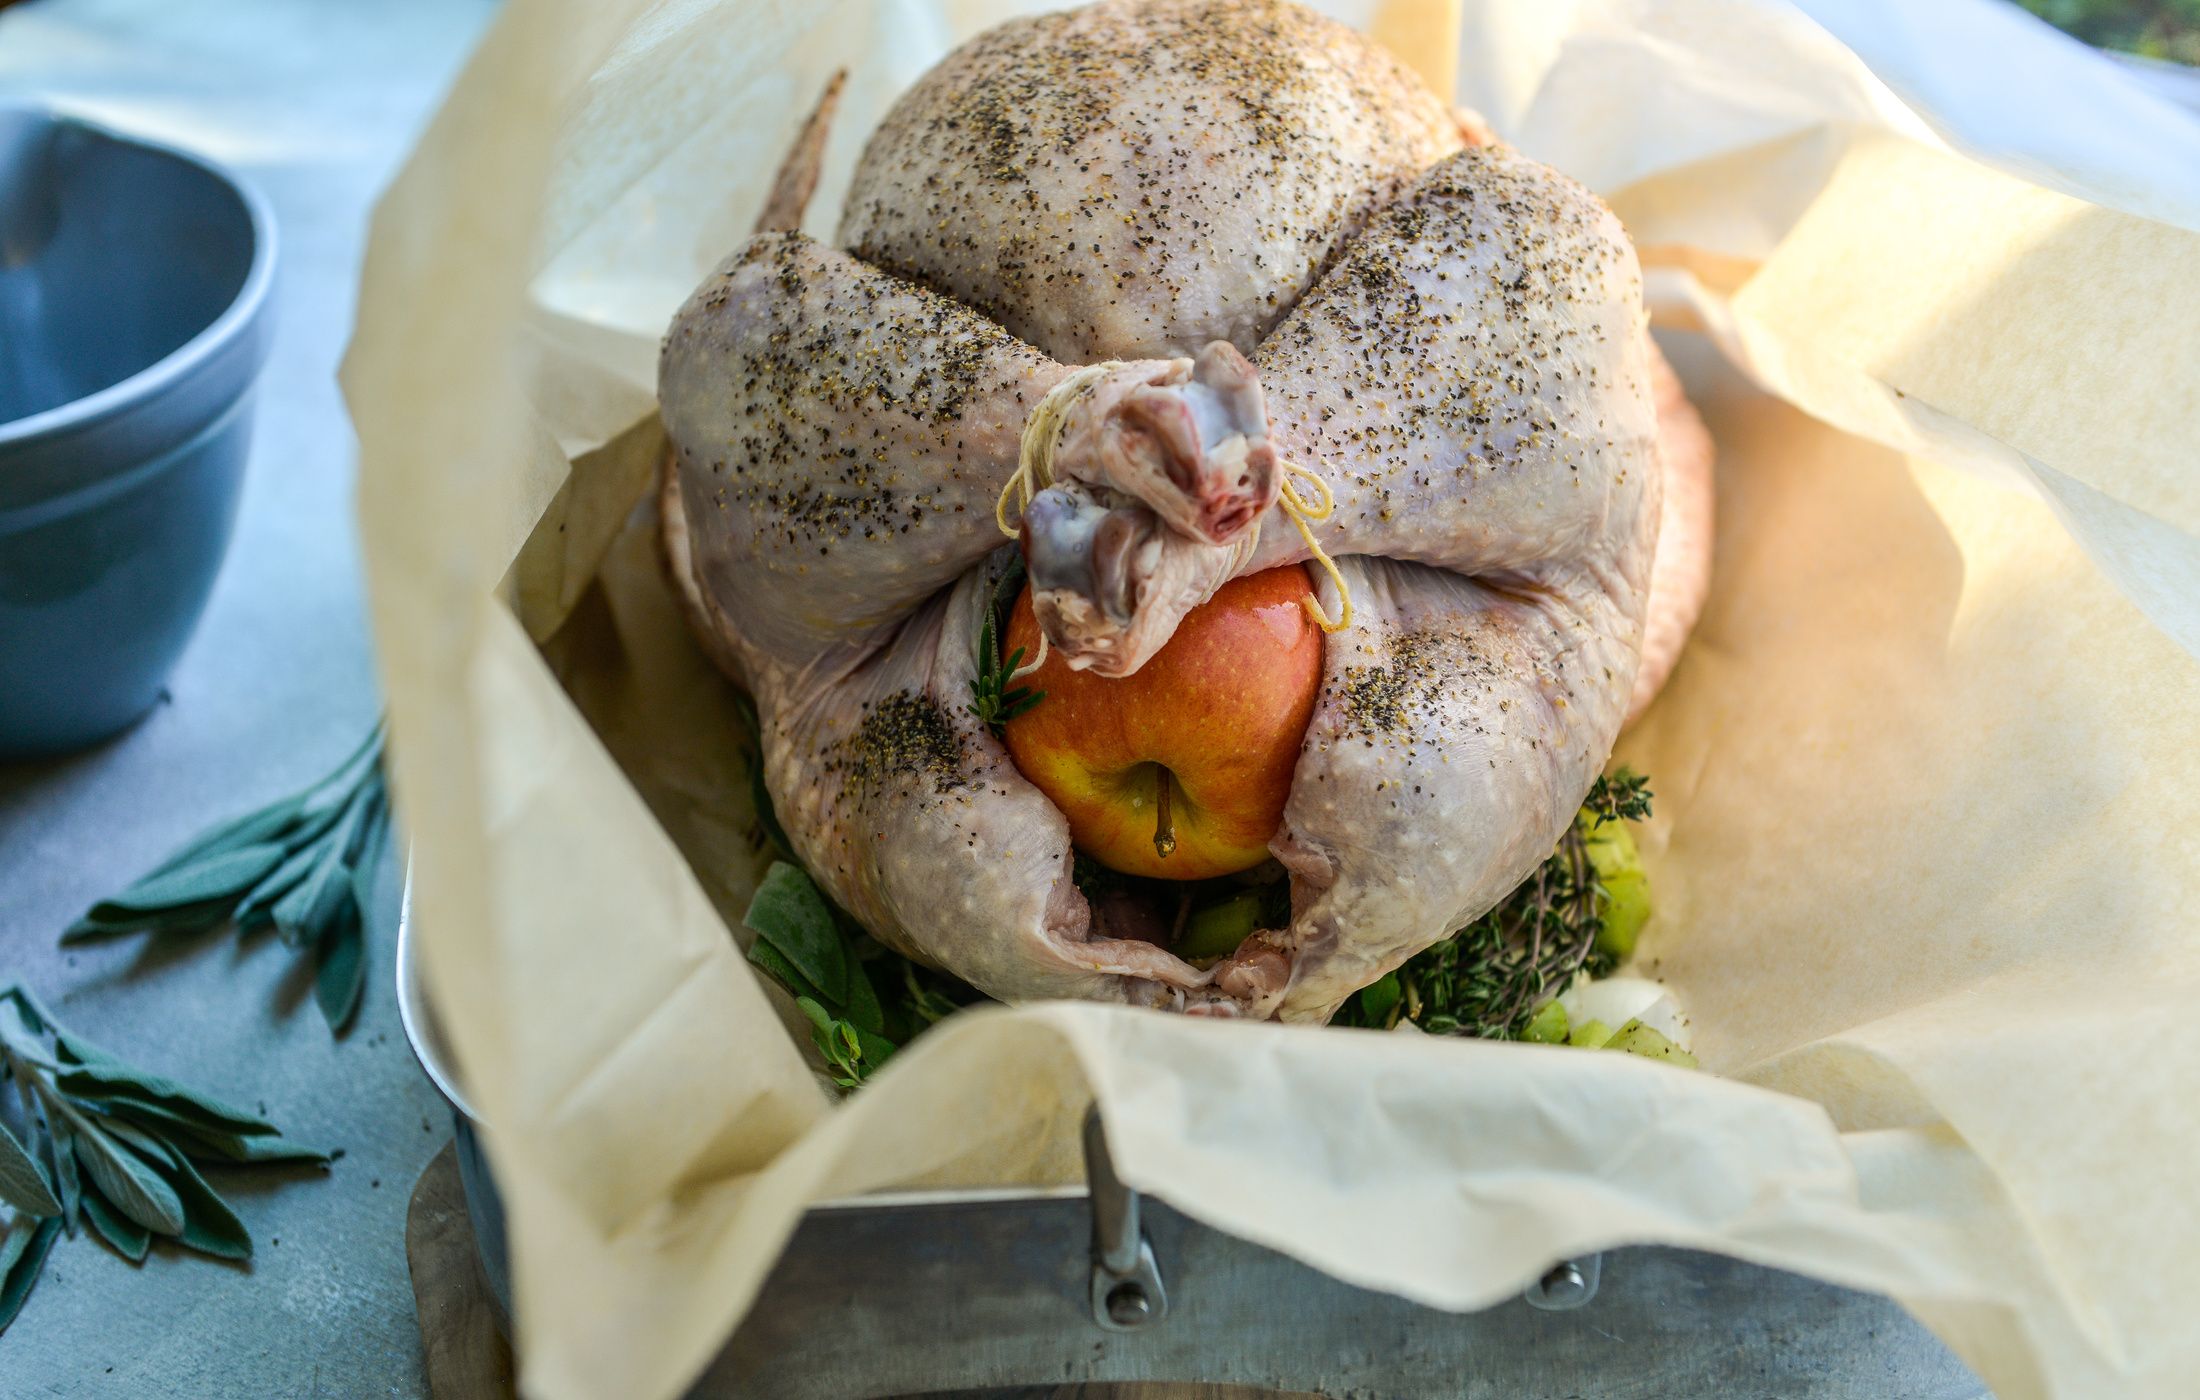 Herb Roasted Whole Turkey in Parchment